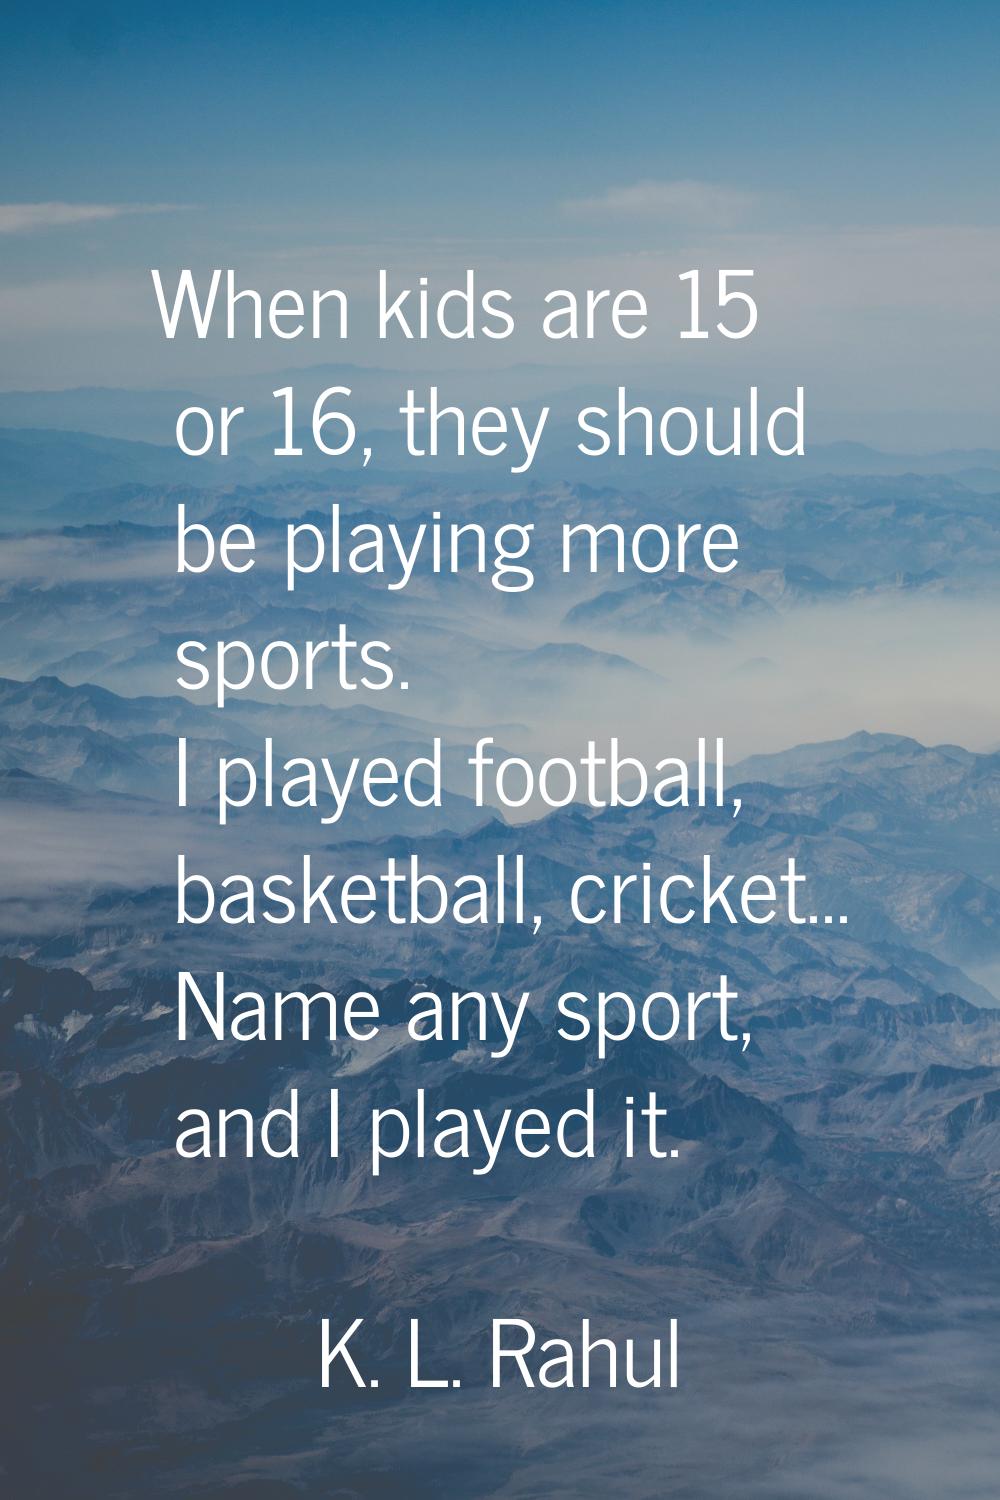 When kids are 15 or 16, they should be playing more sports. I played football, basketball, cricket.